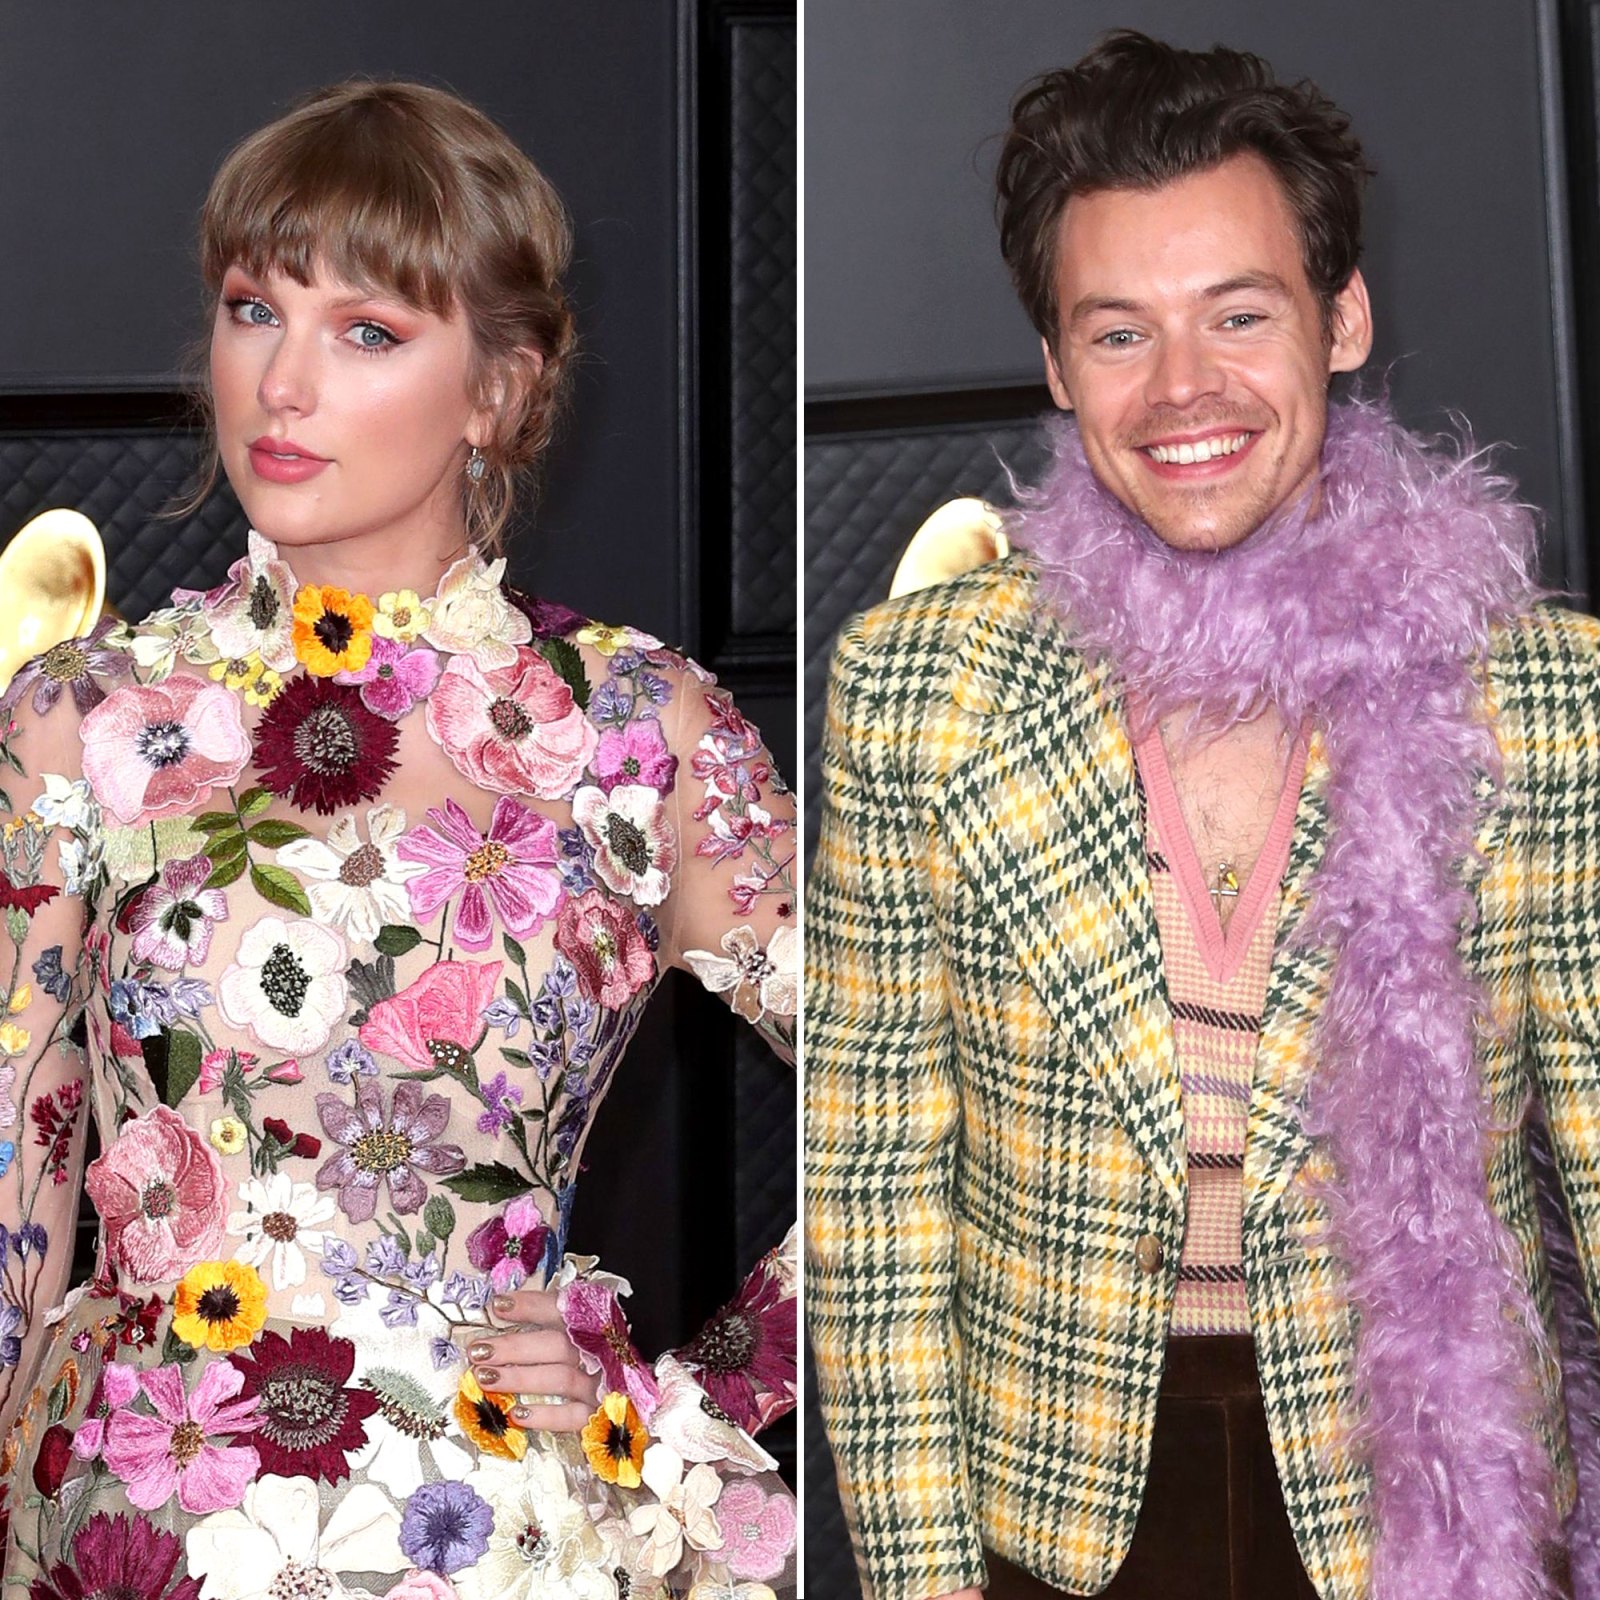 Grammys 2021 Taylor Swift, Harry Styles Reunite in Video UsWeekly